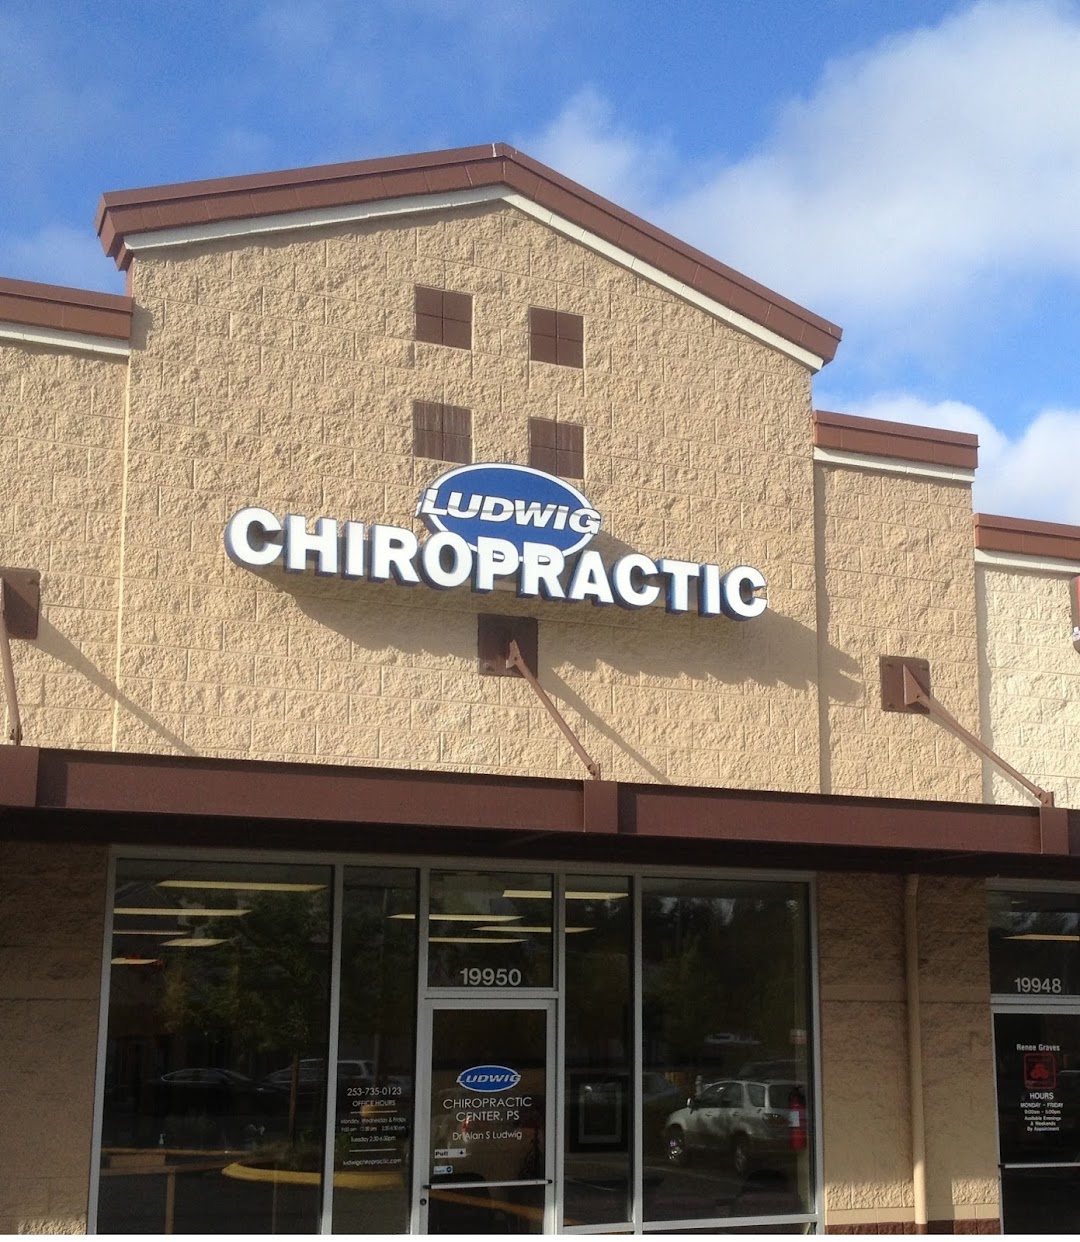 Ludwig Chiropractic Center